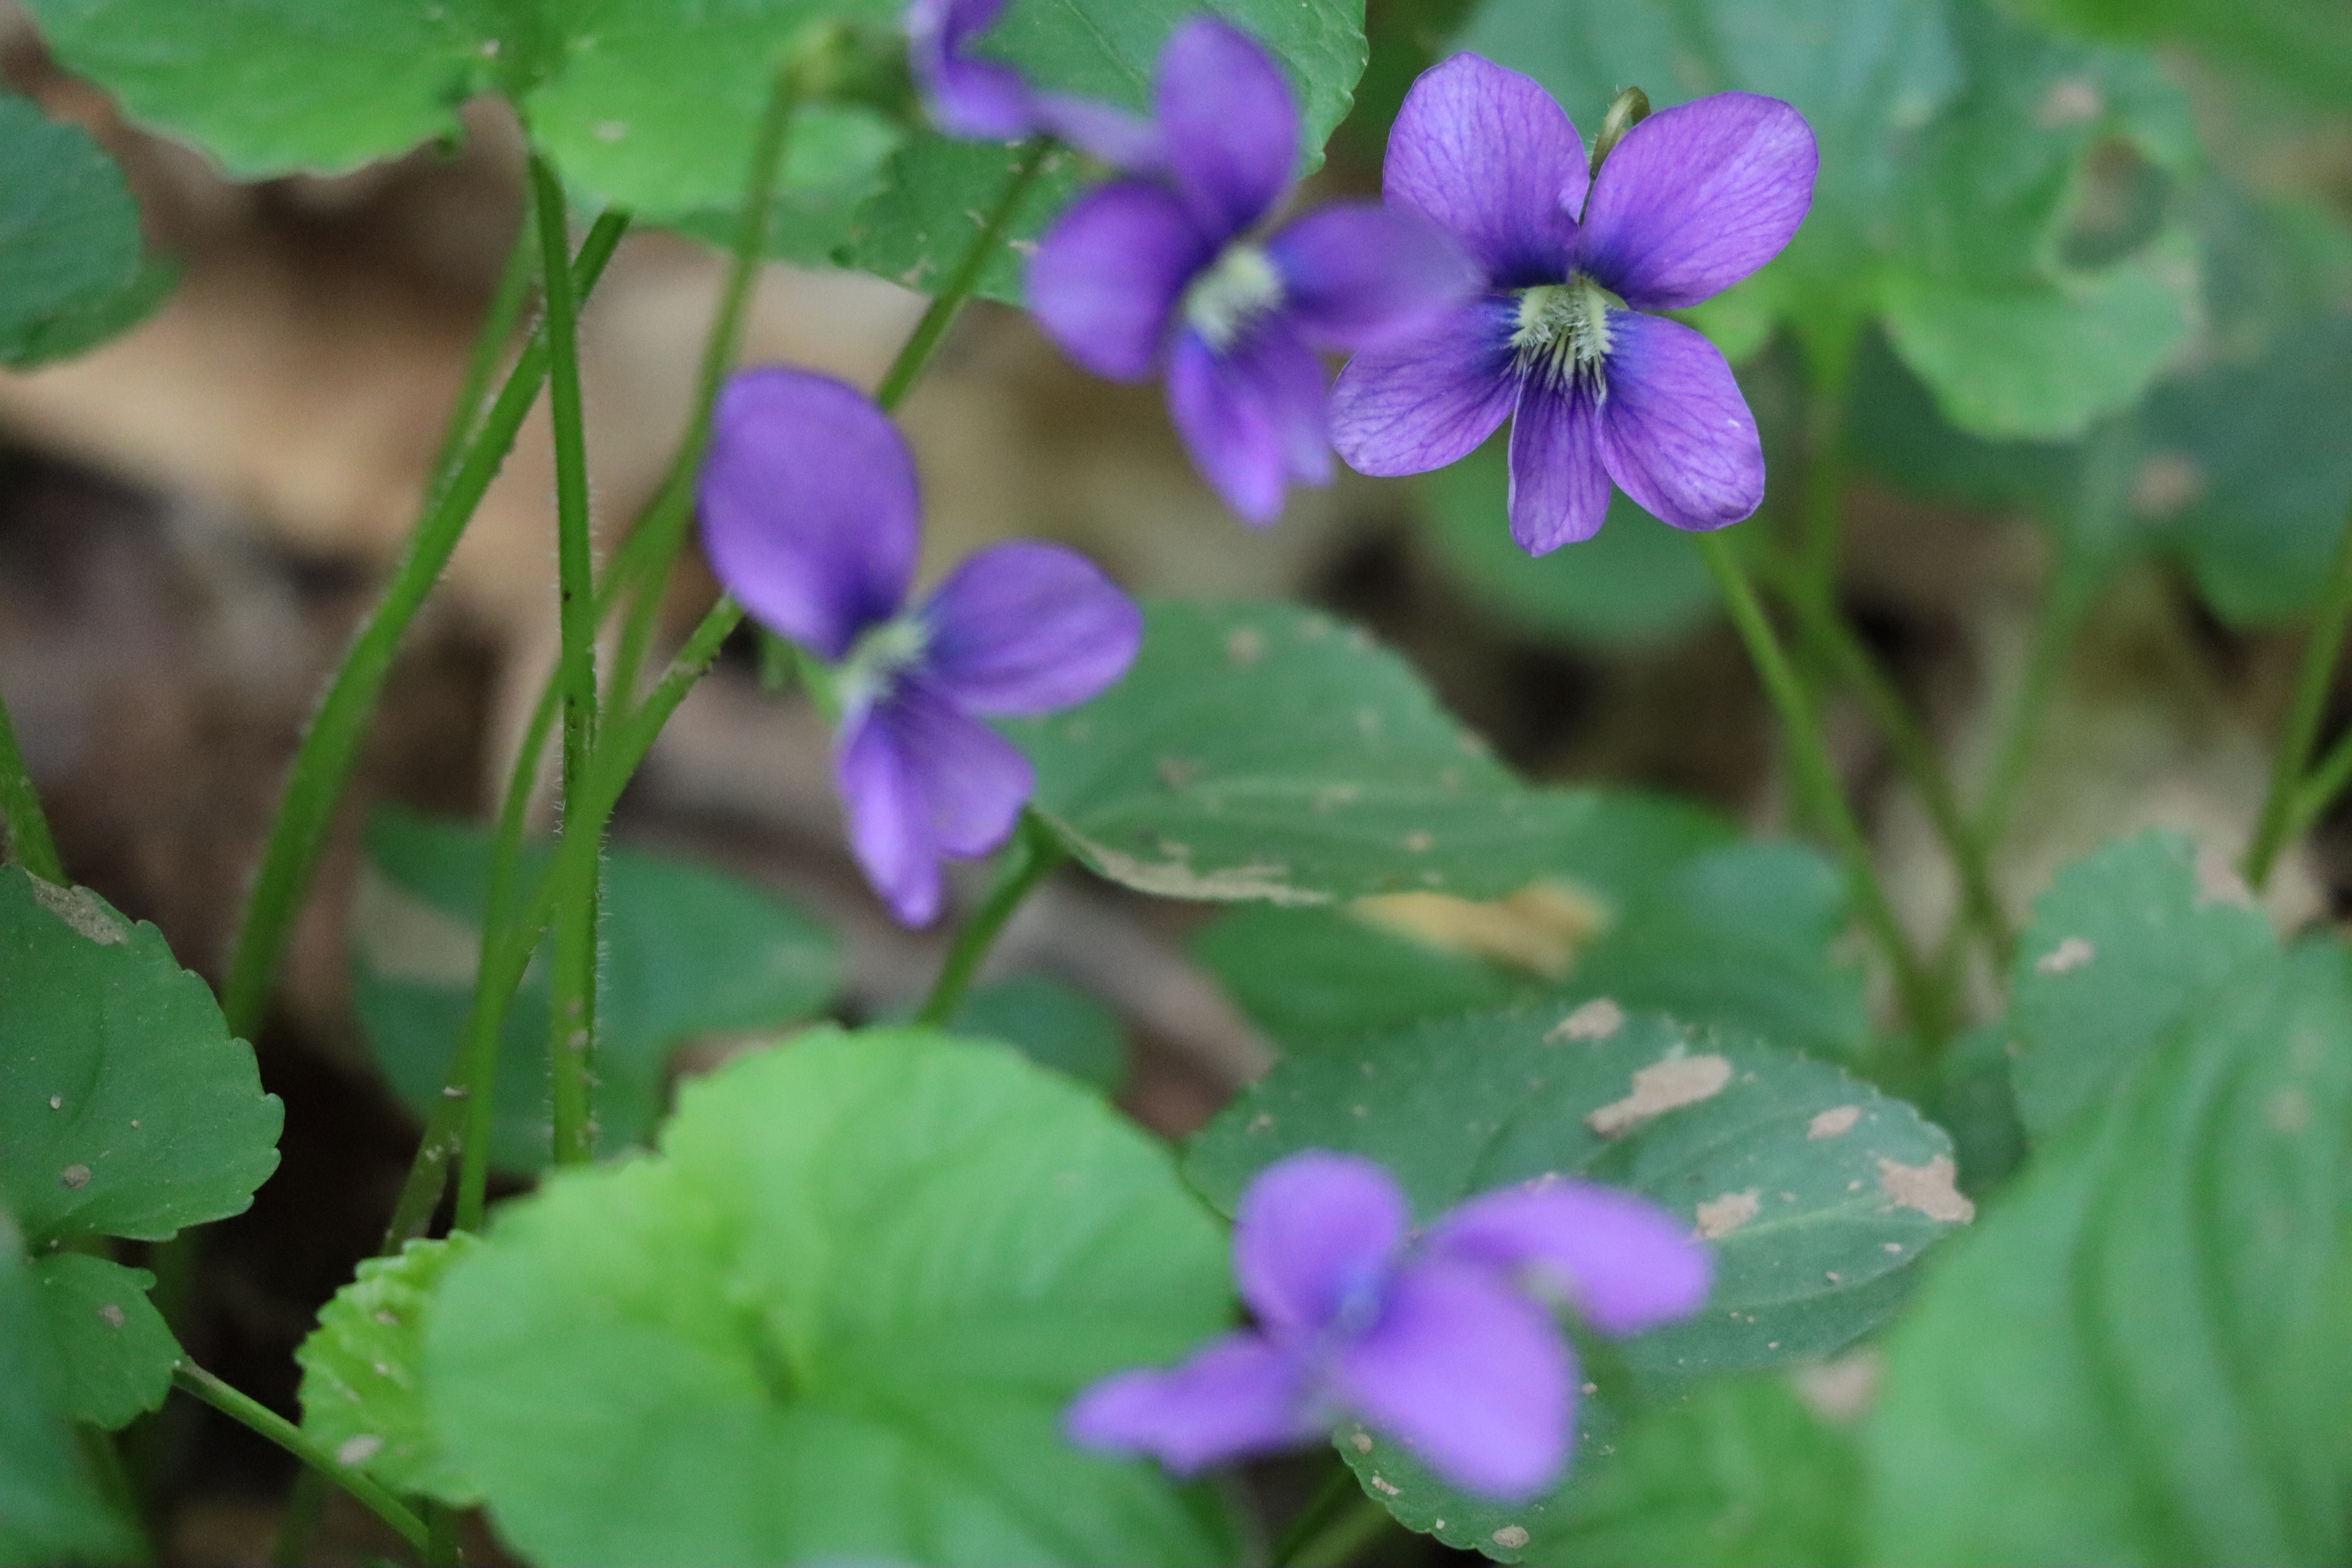 A purple flower surround by green leafs.